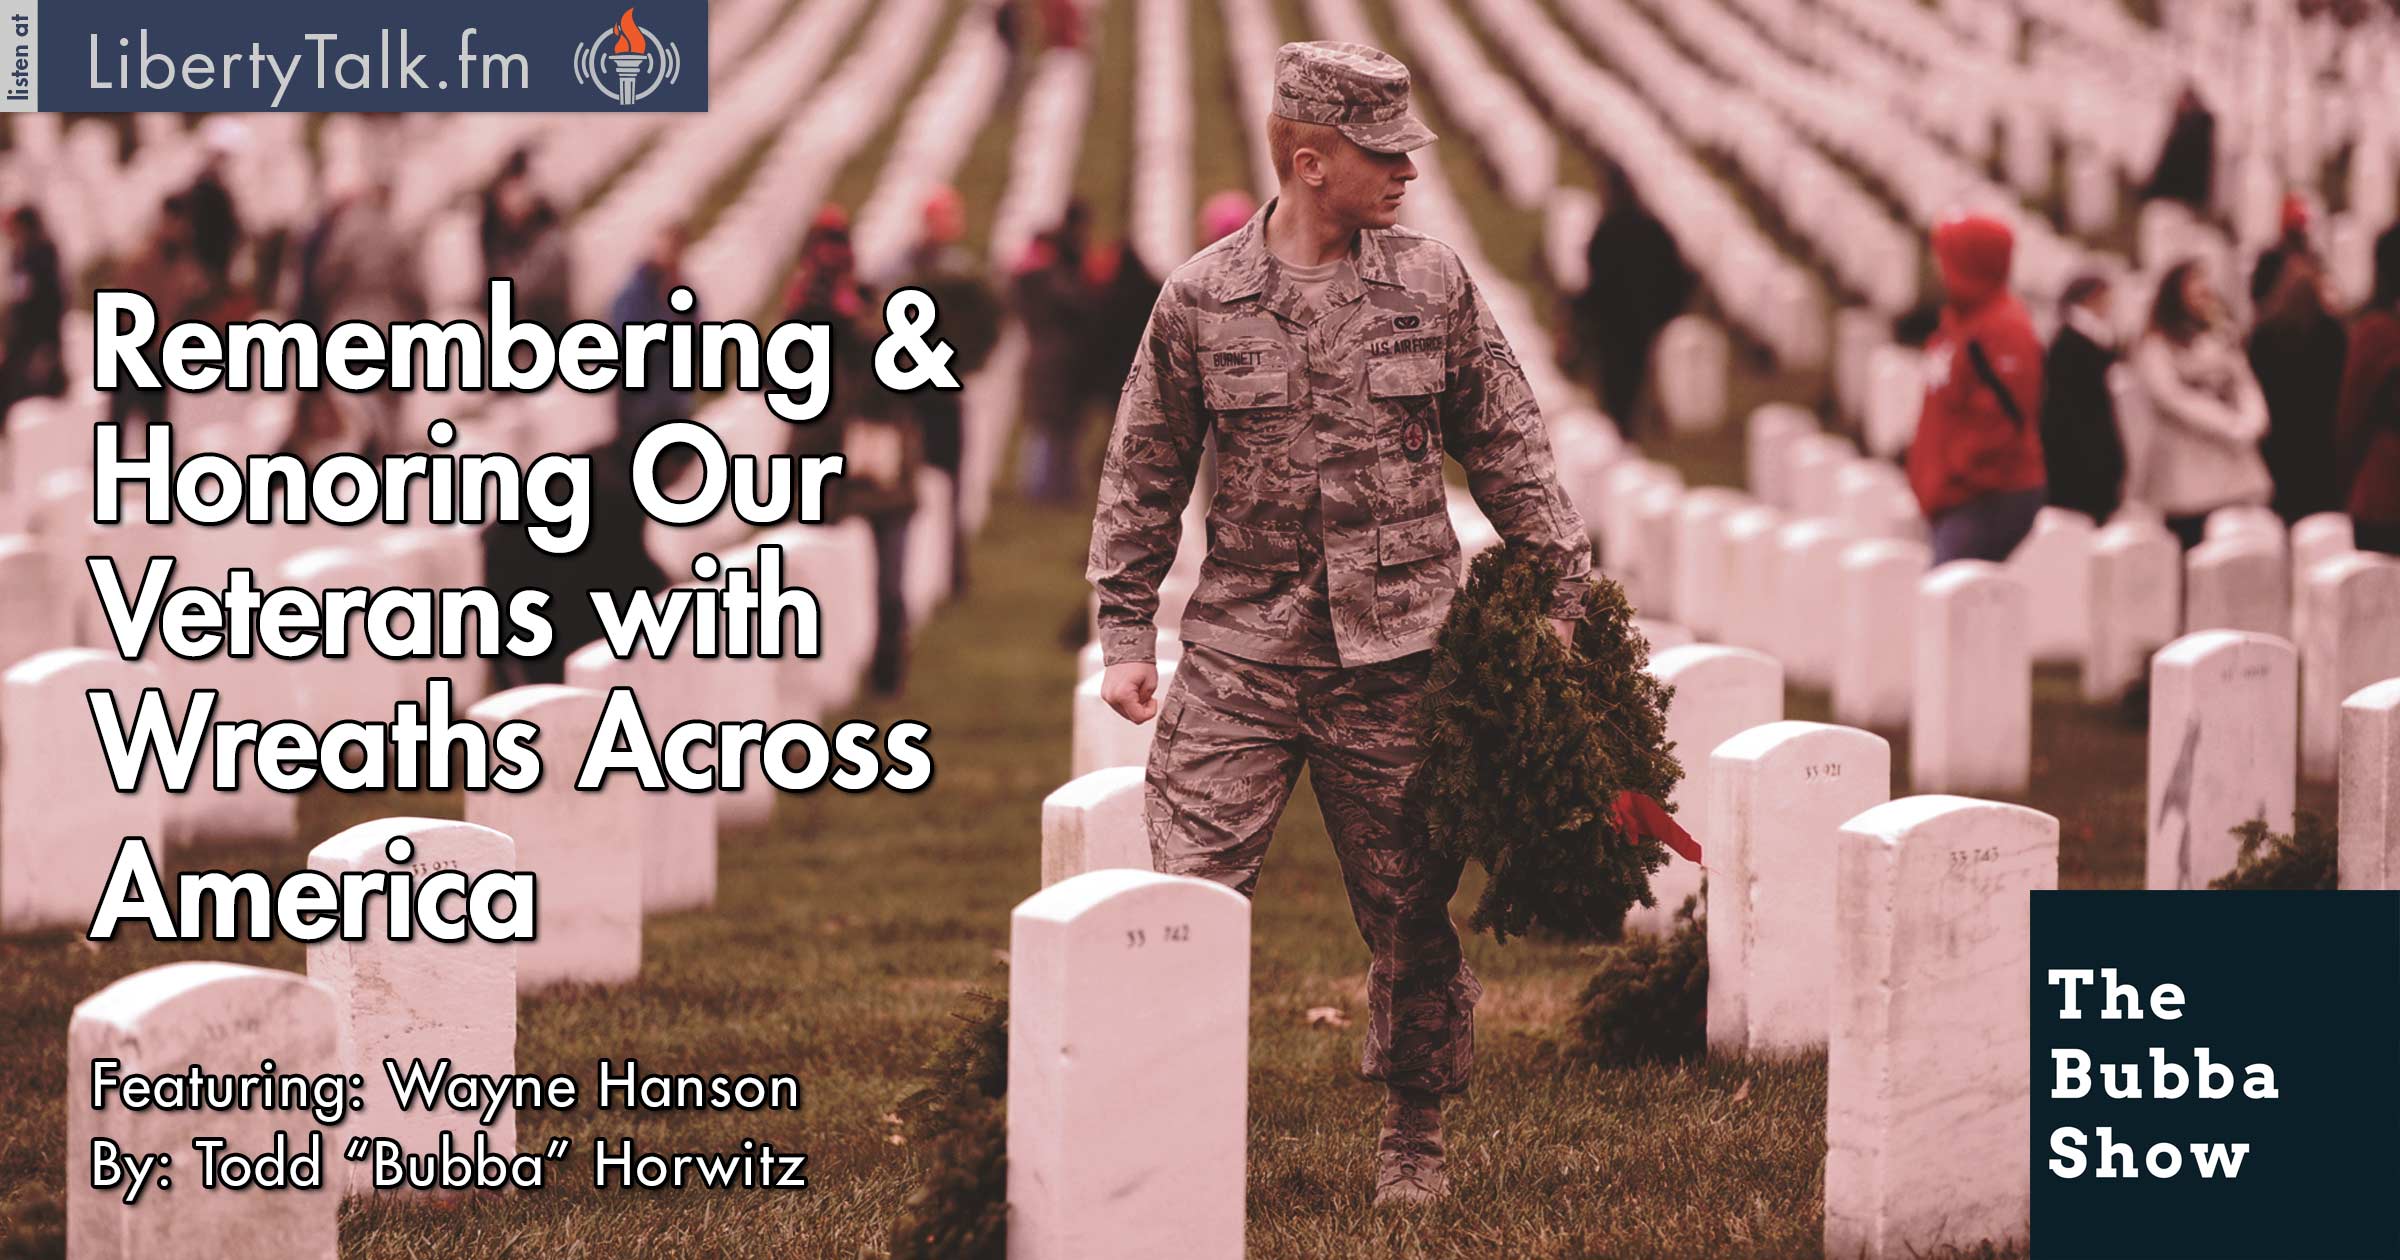 Remembering & Honoring Our Veterans with Wreaths Across America - The Bubba Show